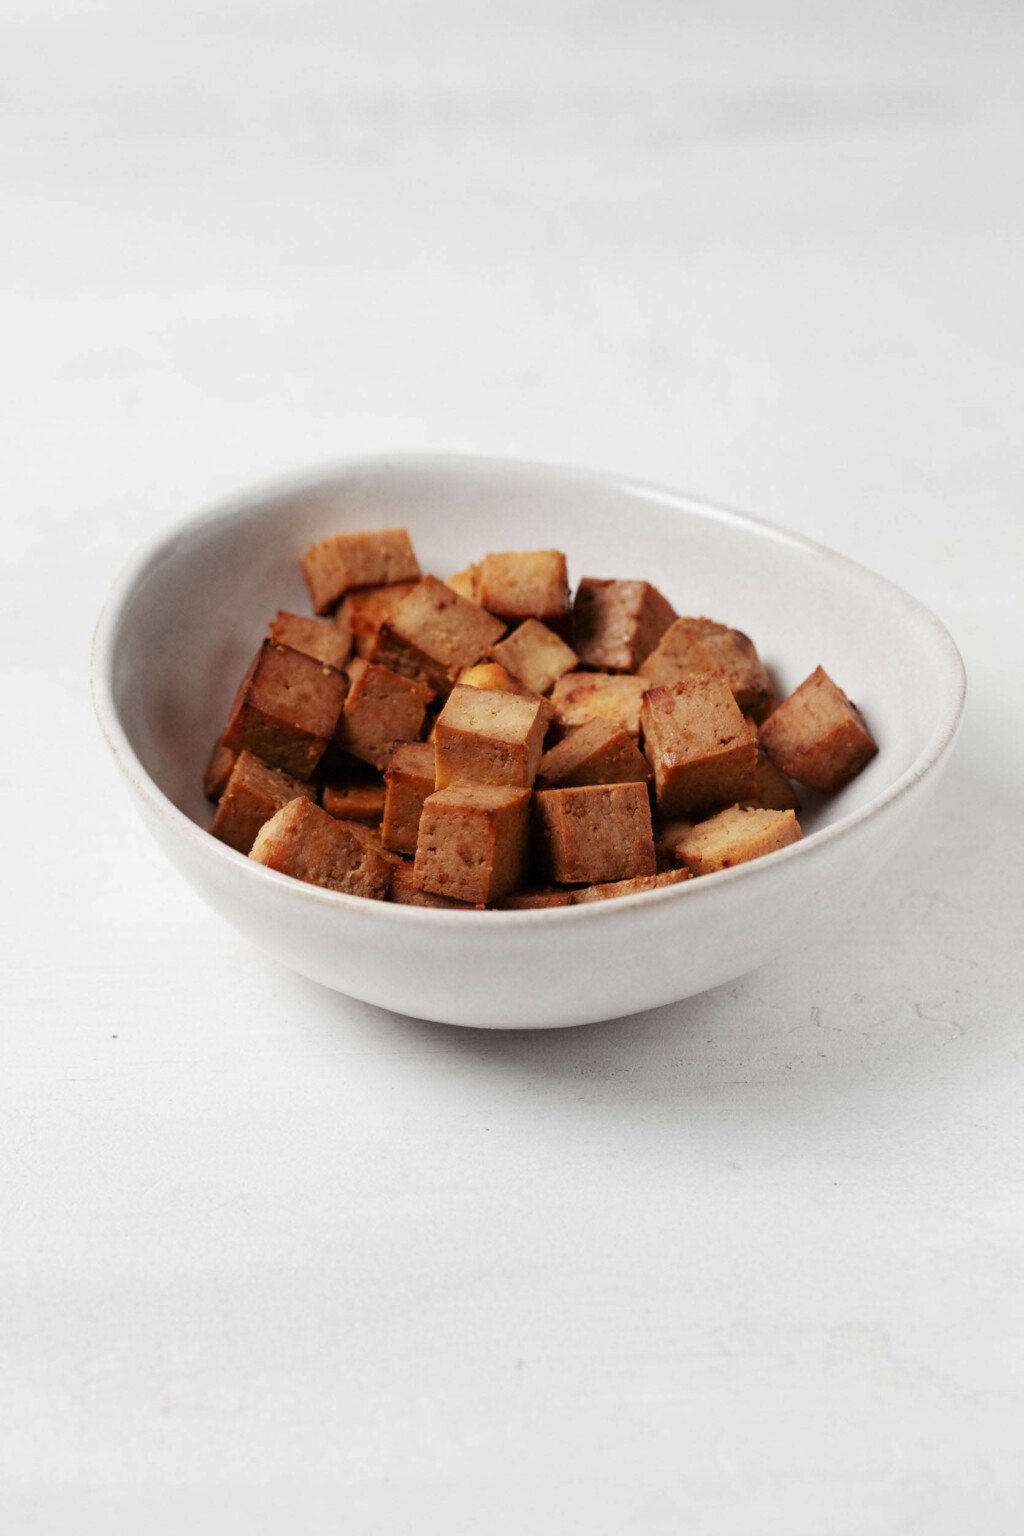 An asymmetrical white bowl holds brown-colored cubes of teriyaki tofu.